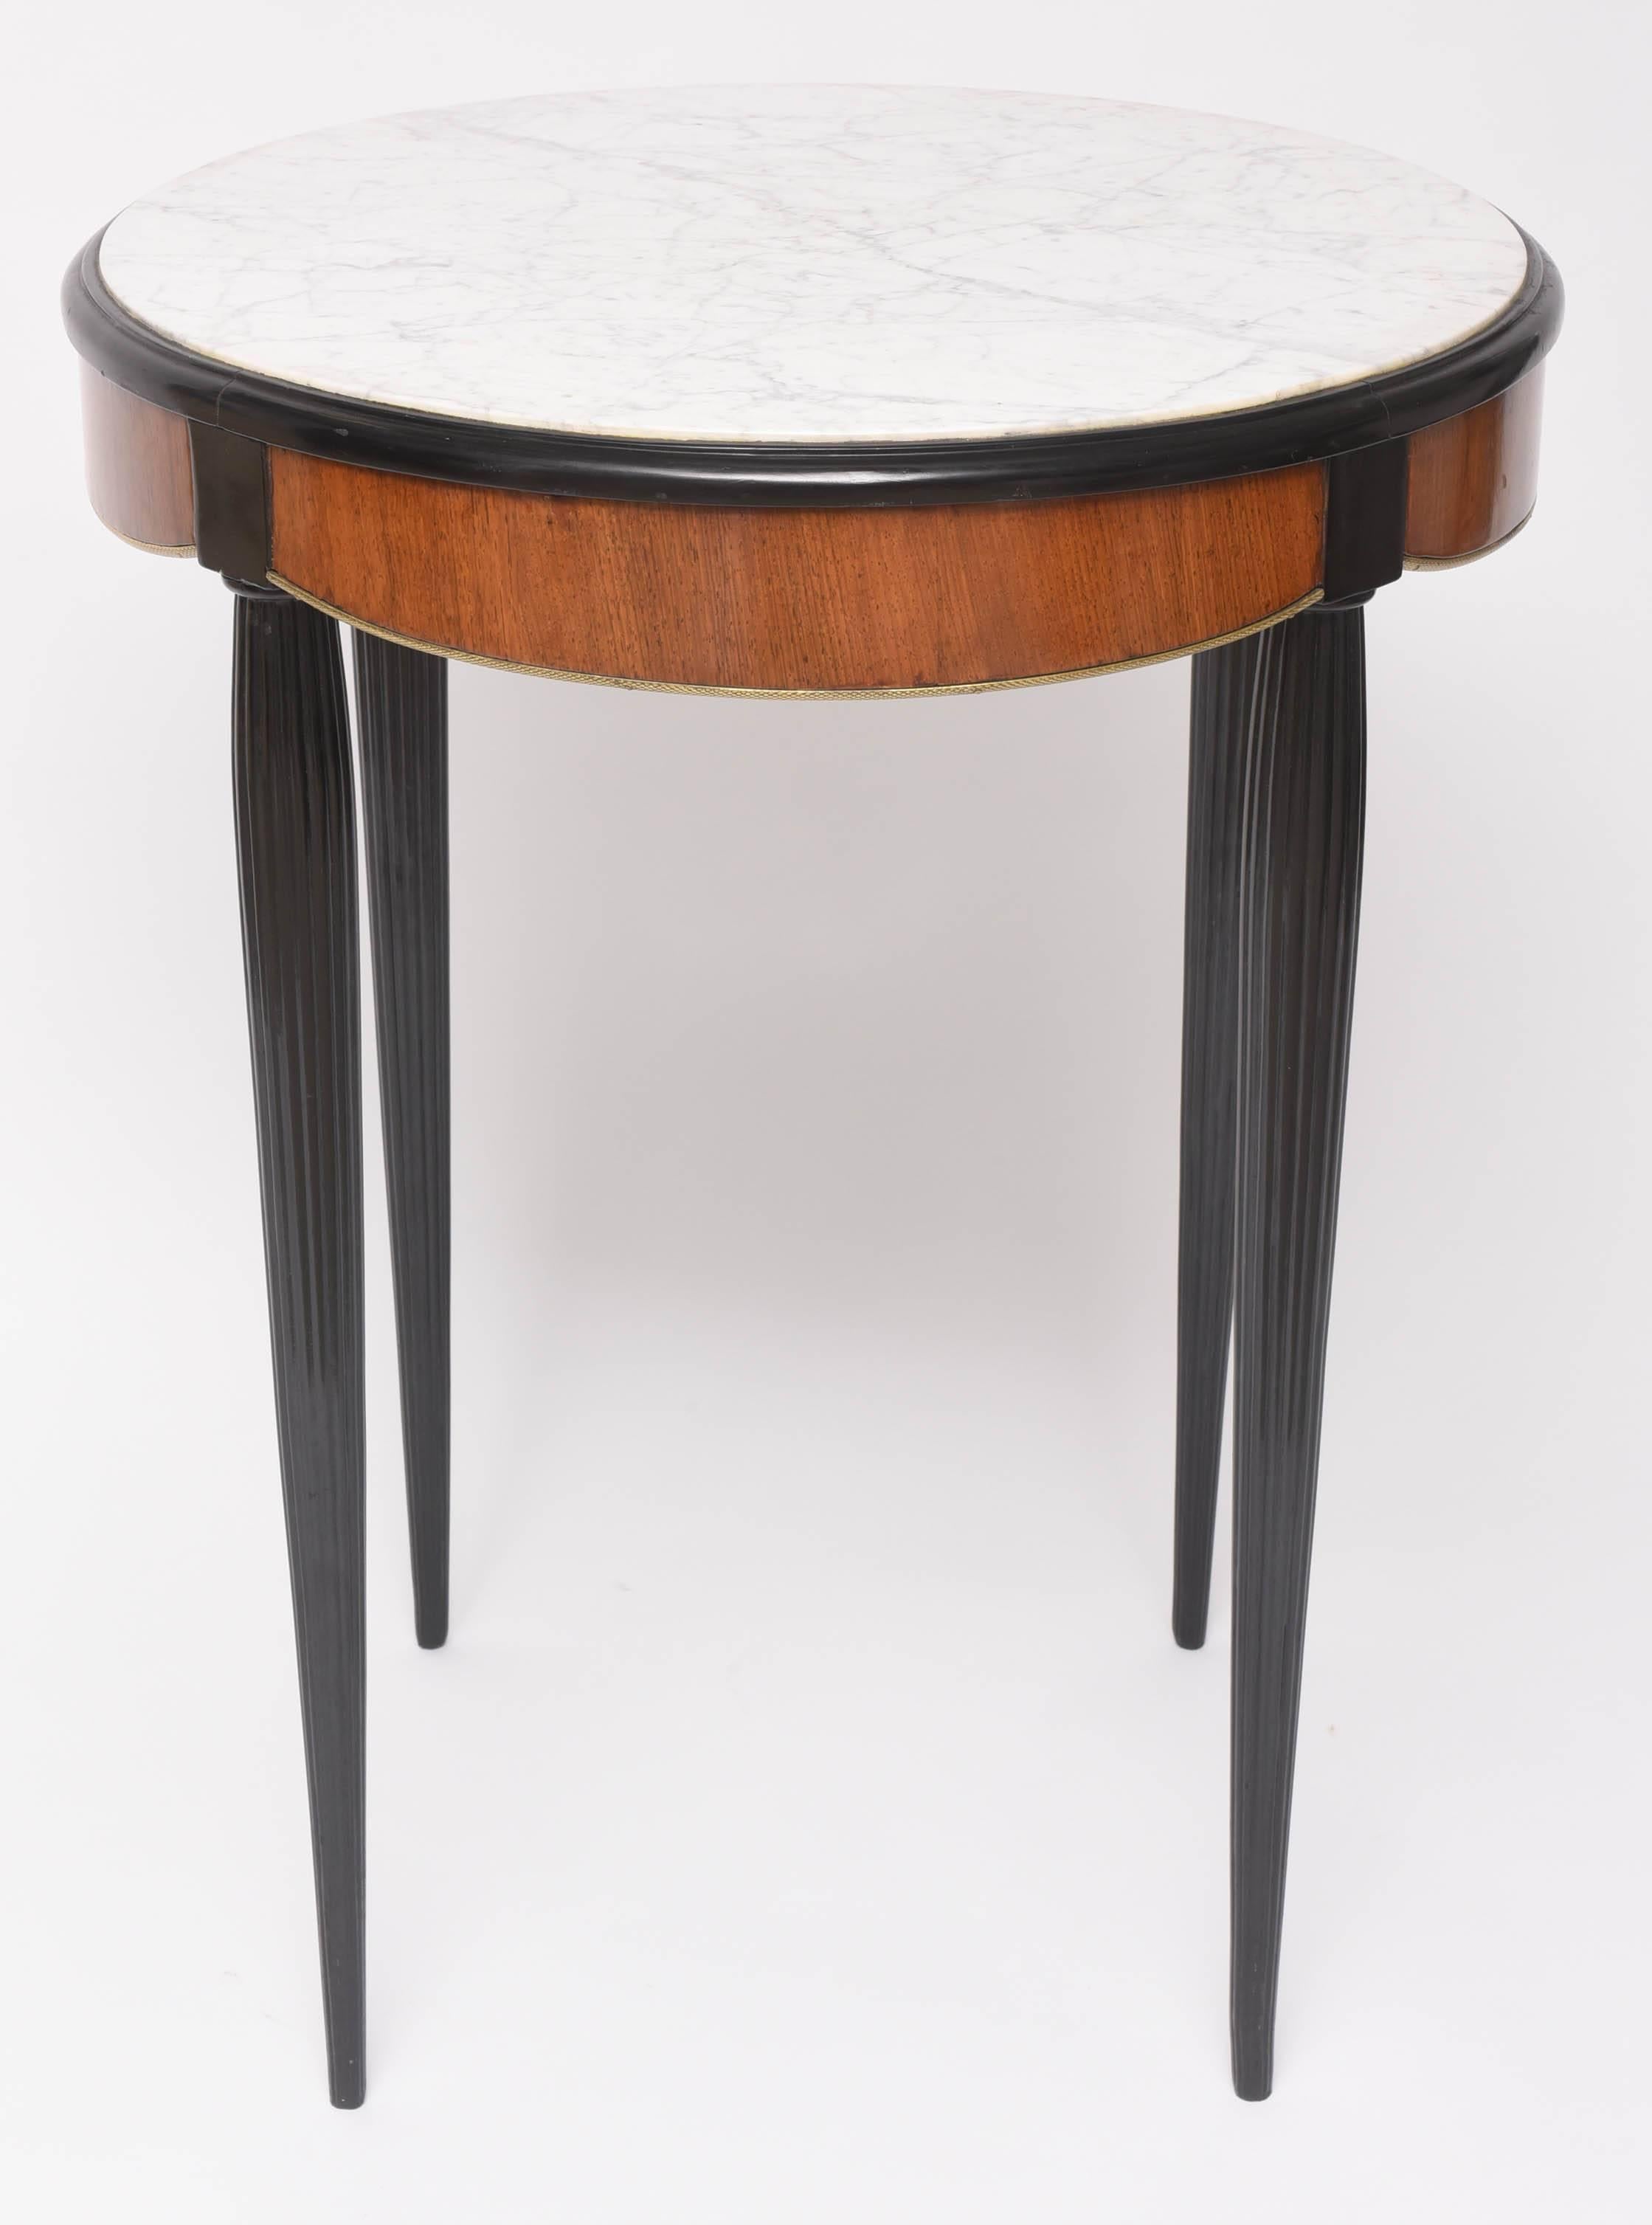 This beautiful and stylish Art Deco style table could be used as a side or center table. With its delicate features of soft-colored Carrara marble inset top, fluted legs and scalloped, mahogany wood apron edged in bronze-doré trim it epitomizes the